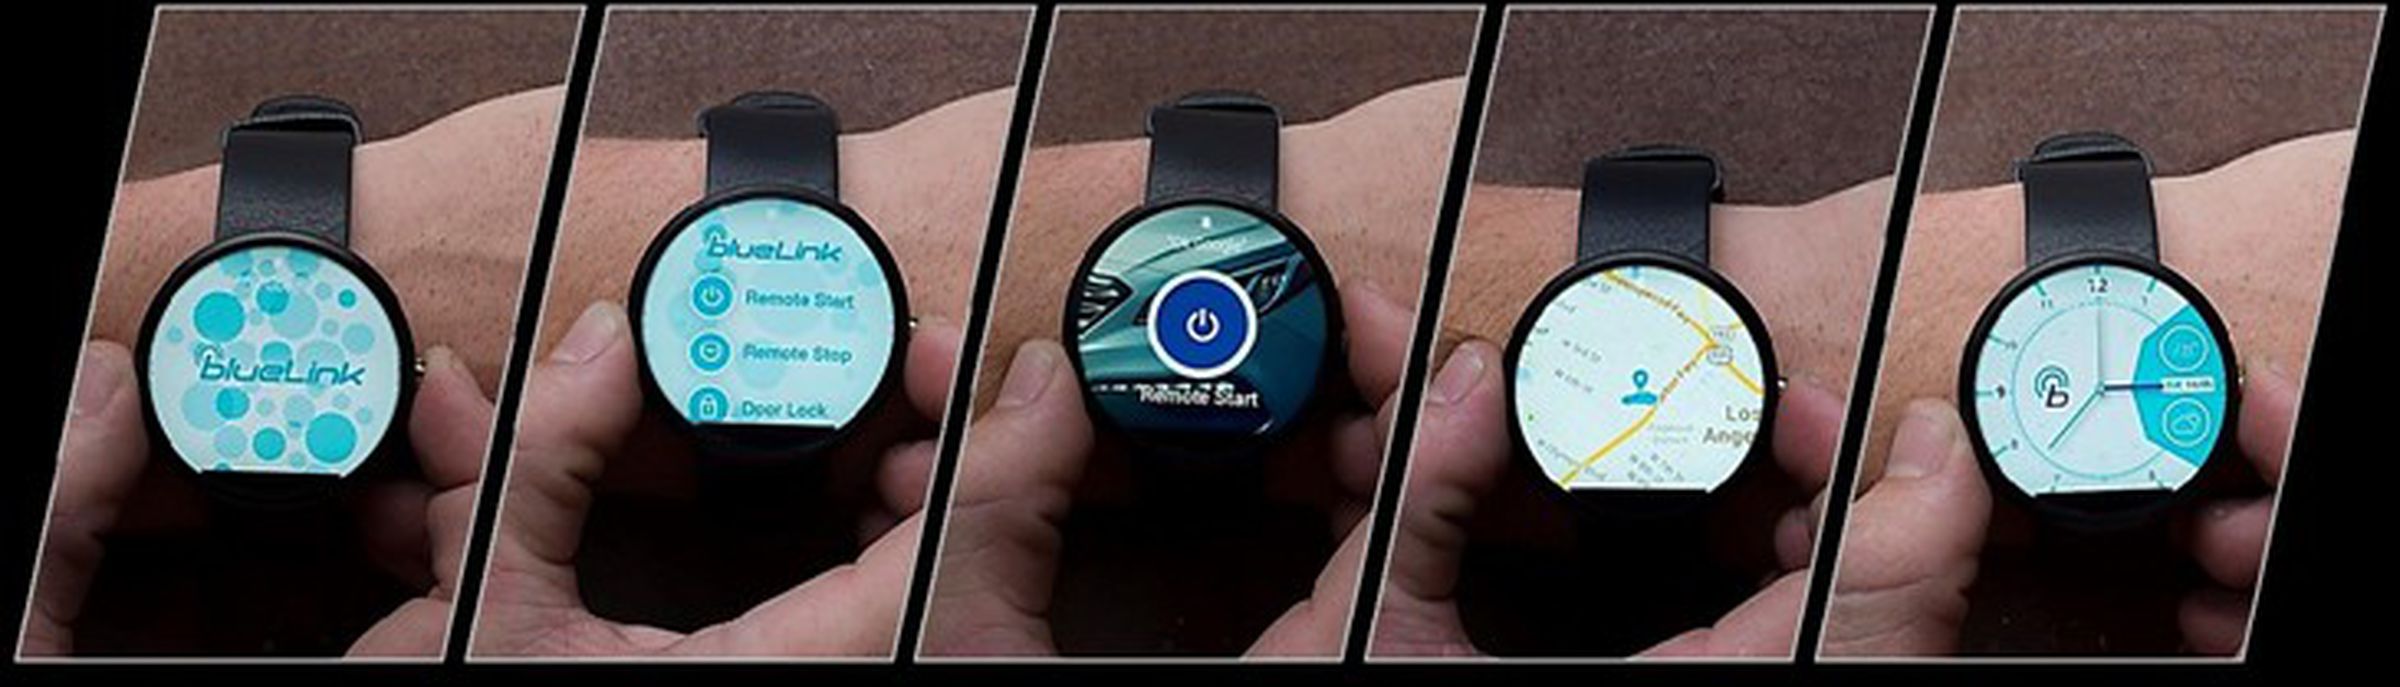 Hyundai Blue Link android wear